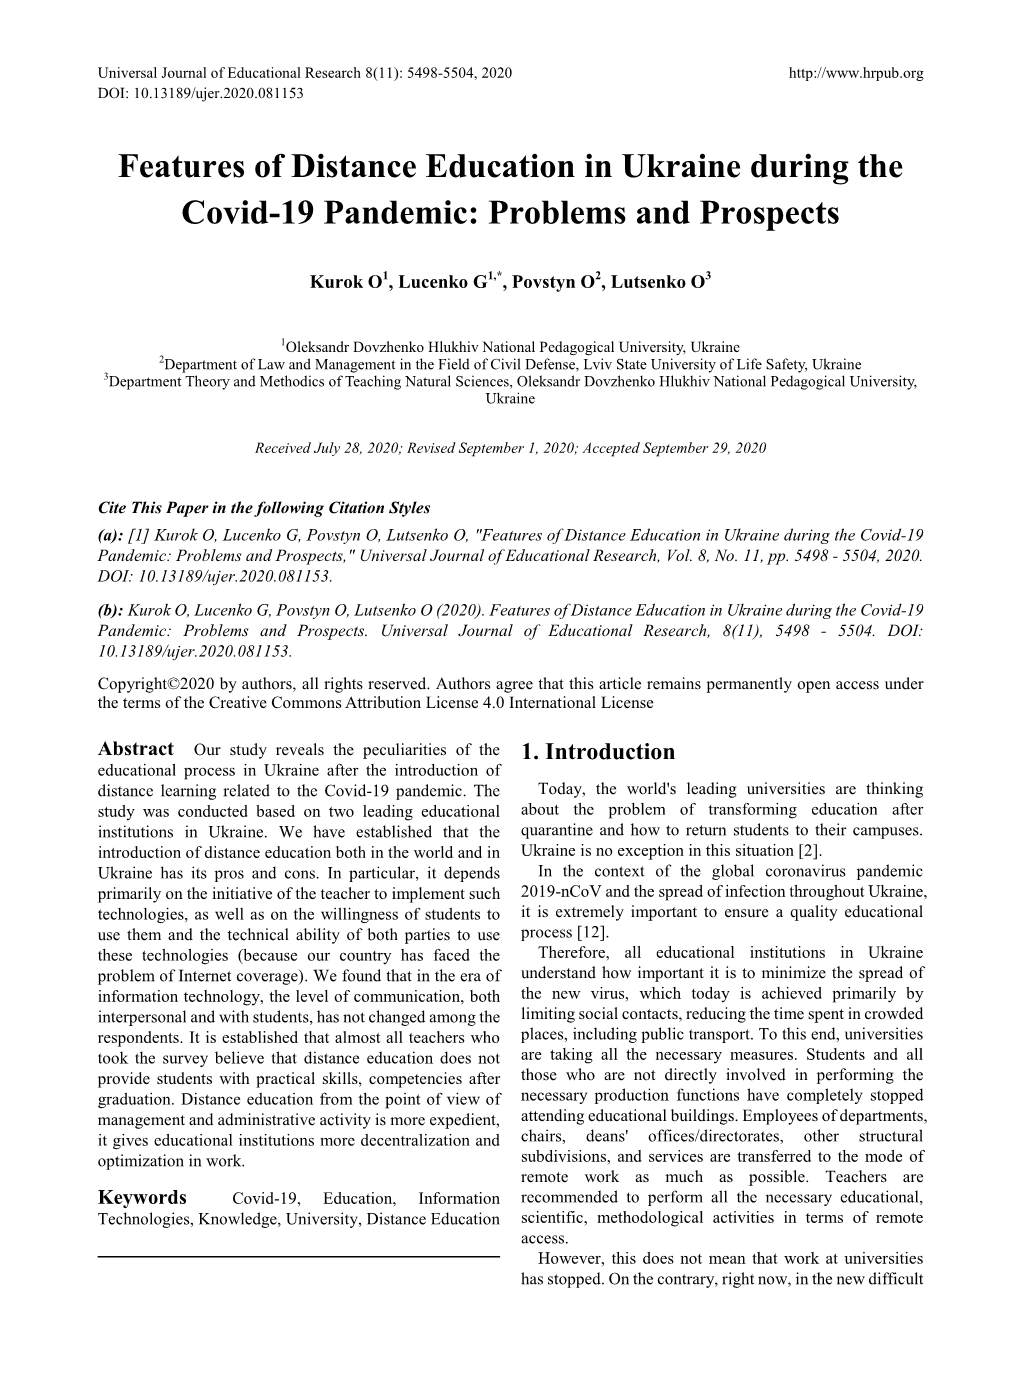 Features of Distance Education in Ukraine During the Covid-19 Pandemic: Problems and Prospects